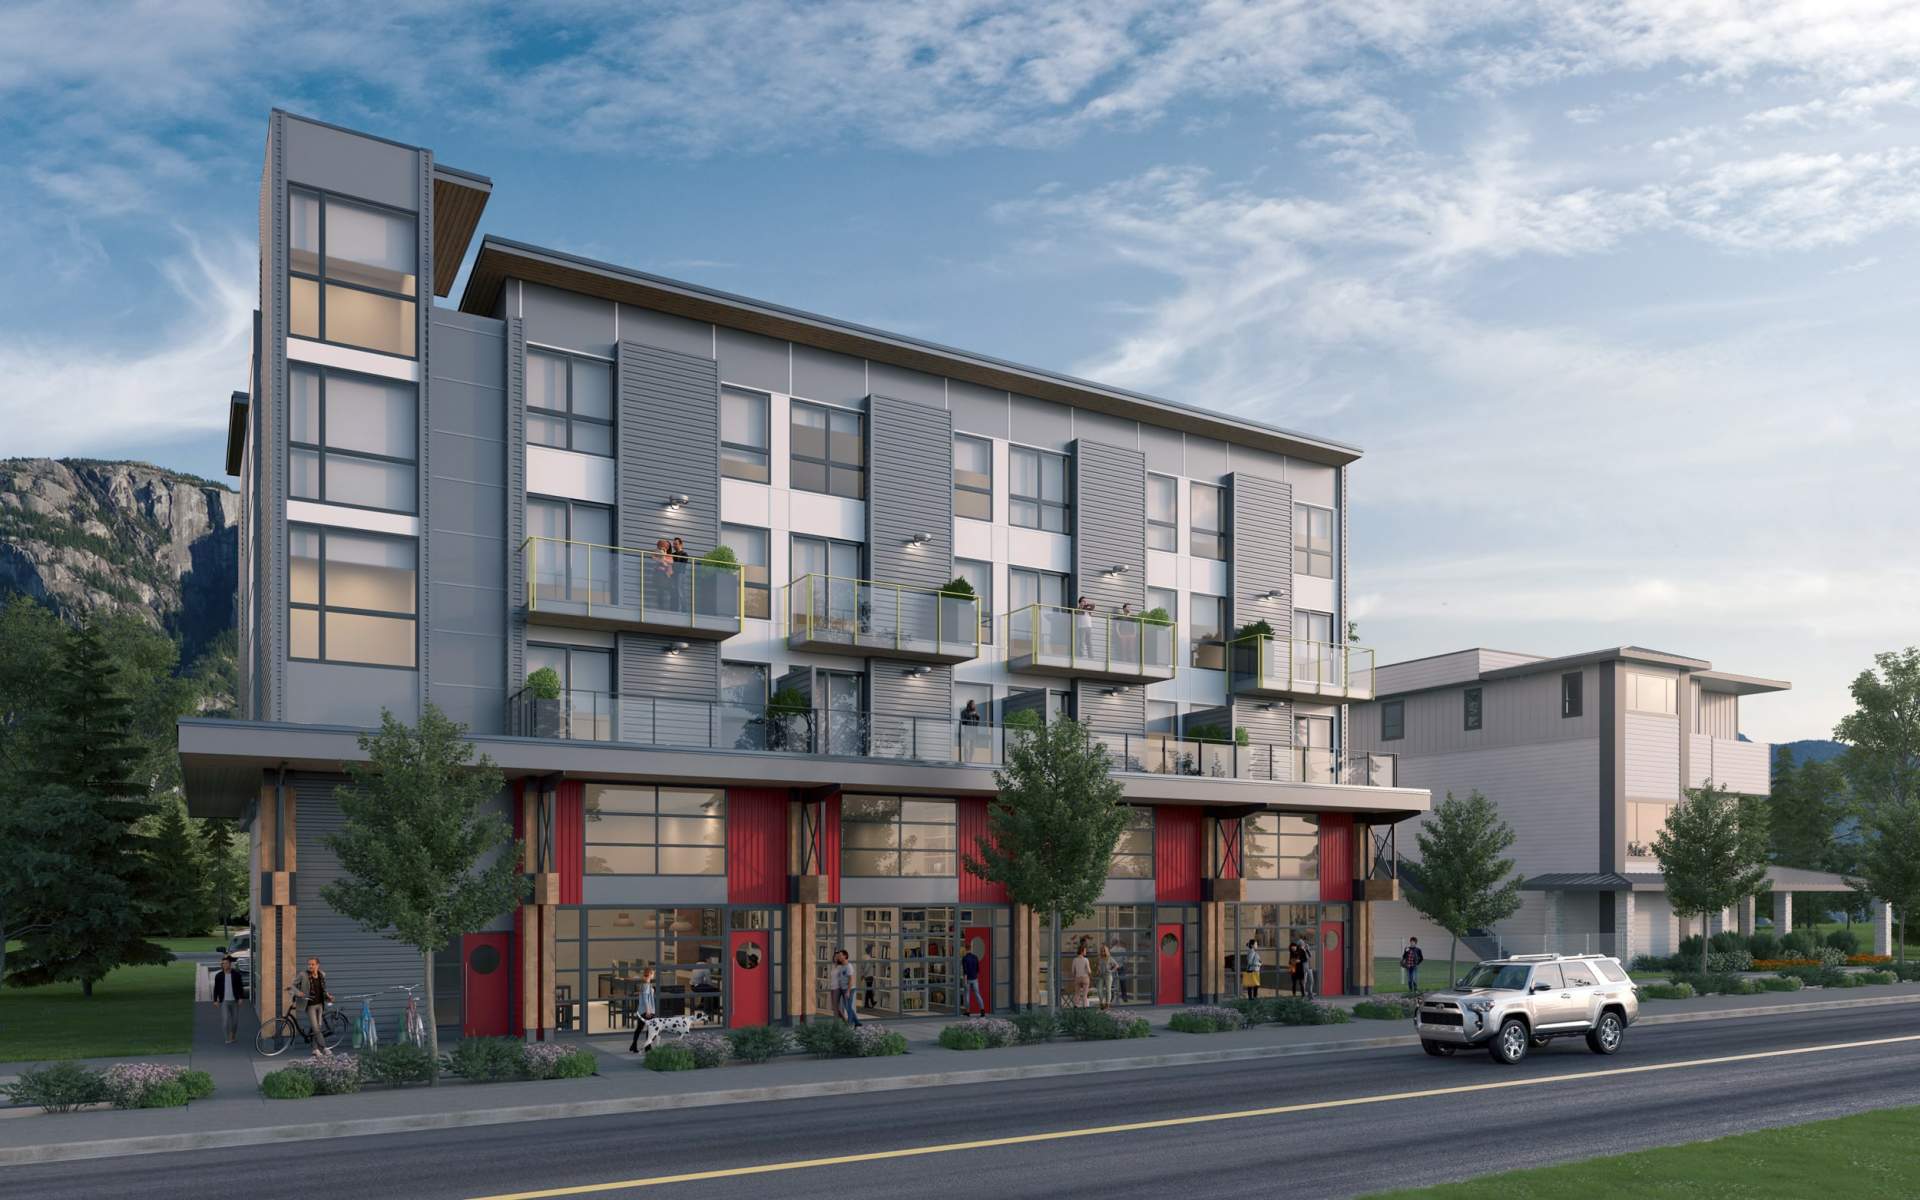 The Lofts by WesCon – Plans, Prices, Availability